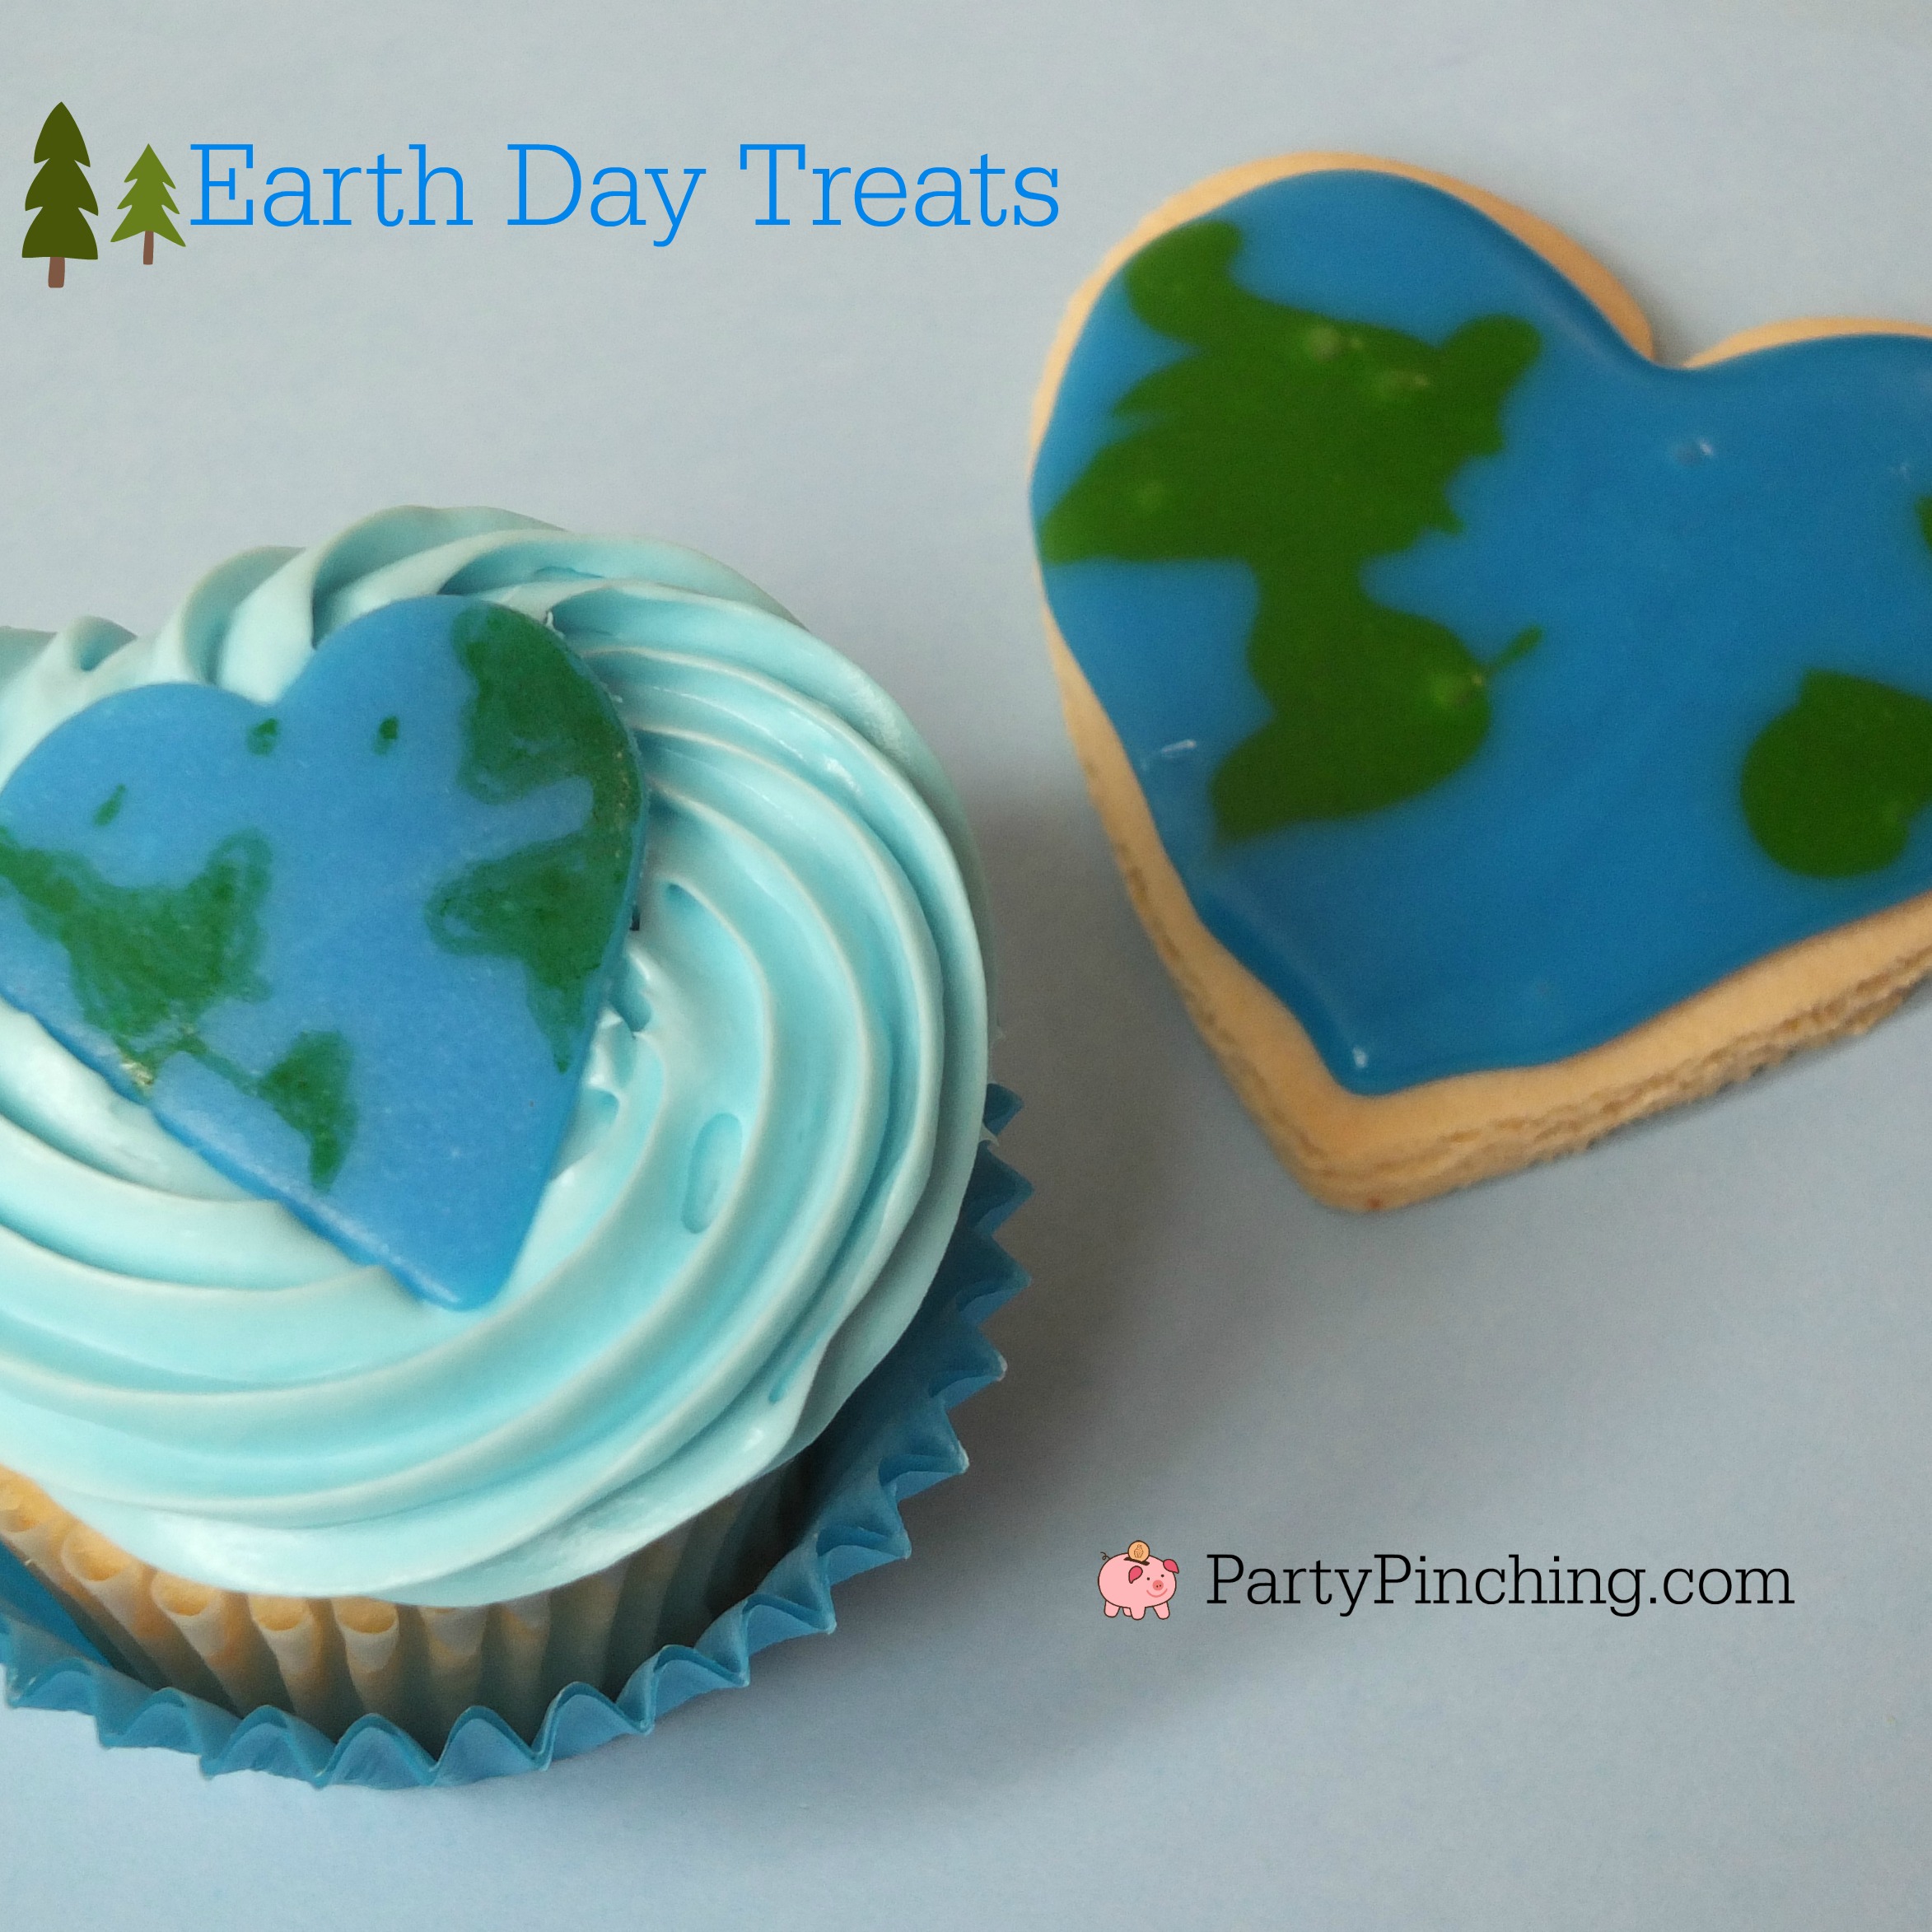 Earth Cake with Rock Candy Core Recipe - Tablespoon.com